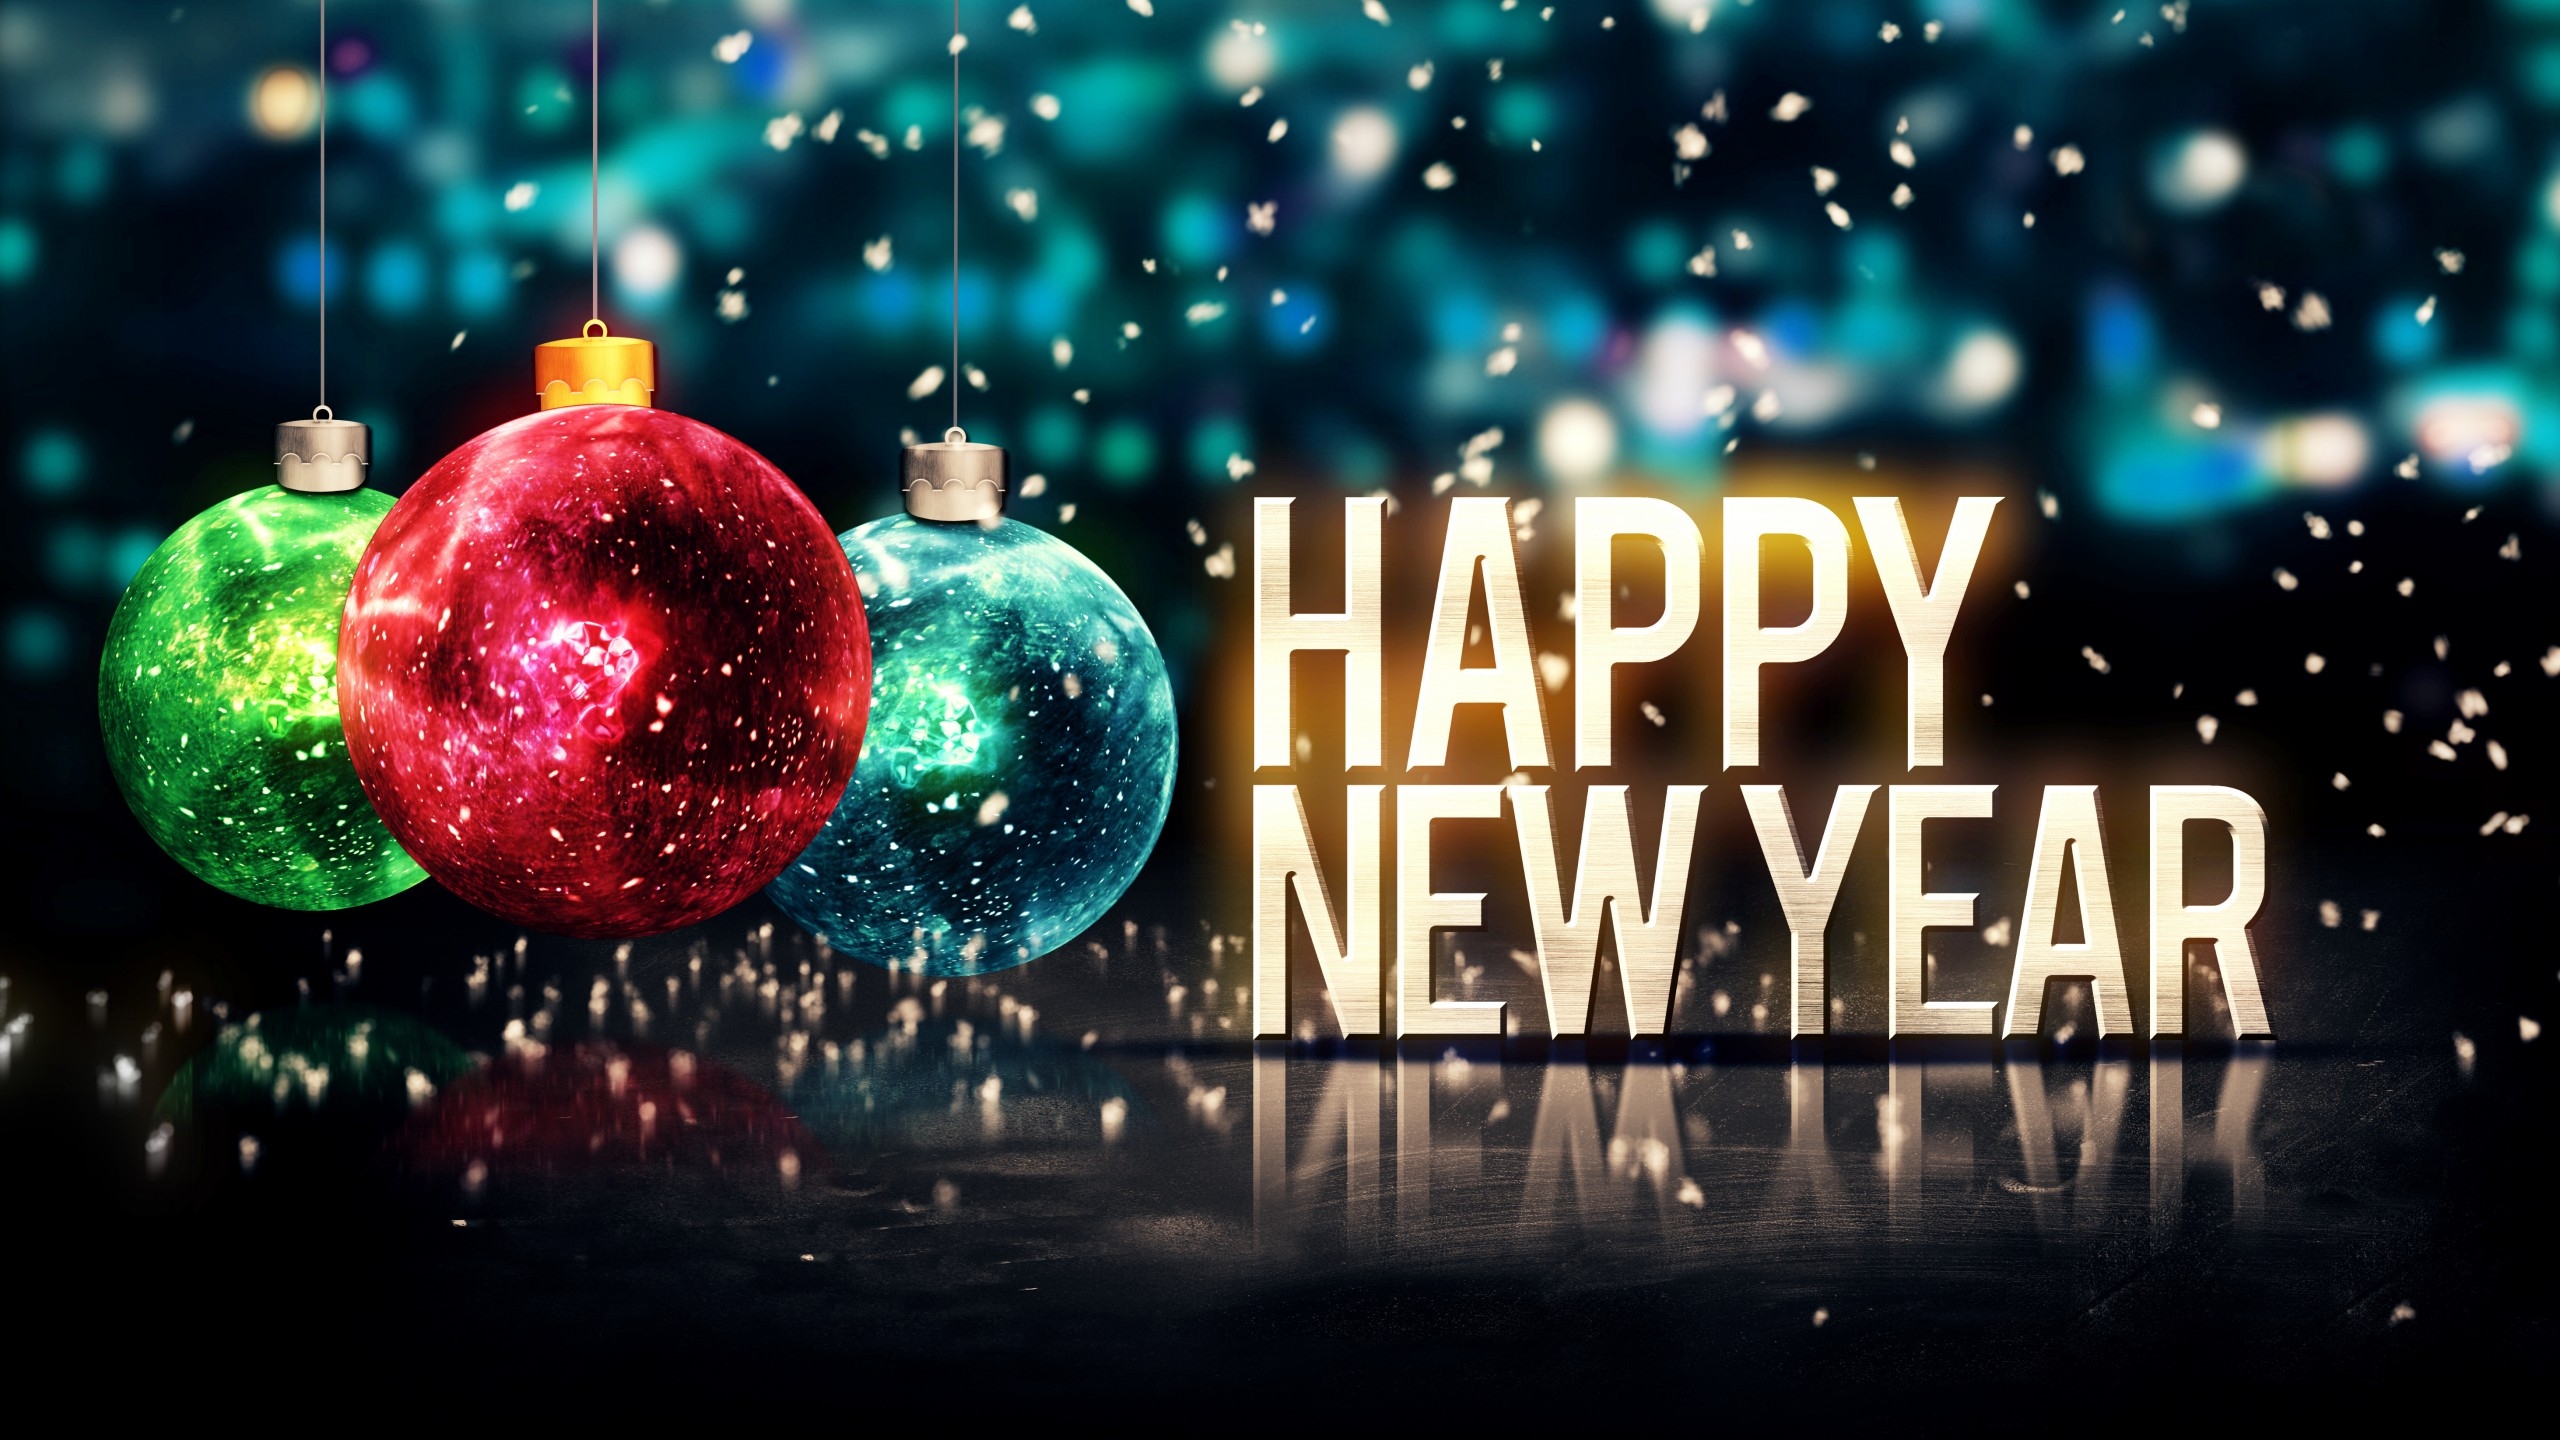 Happy New Year Ornament for 2560x1440 HDTV resolution